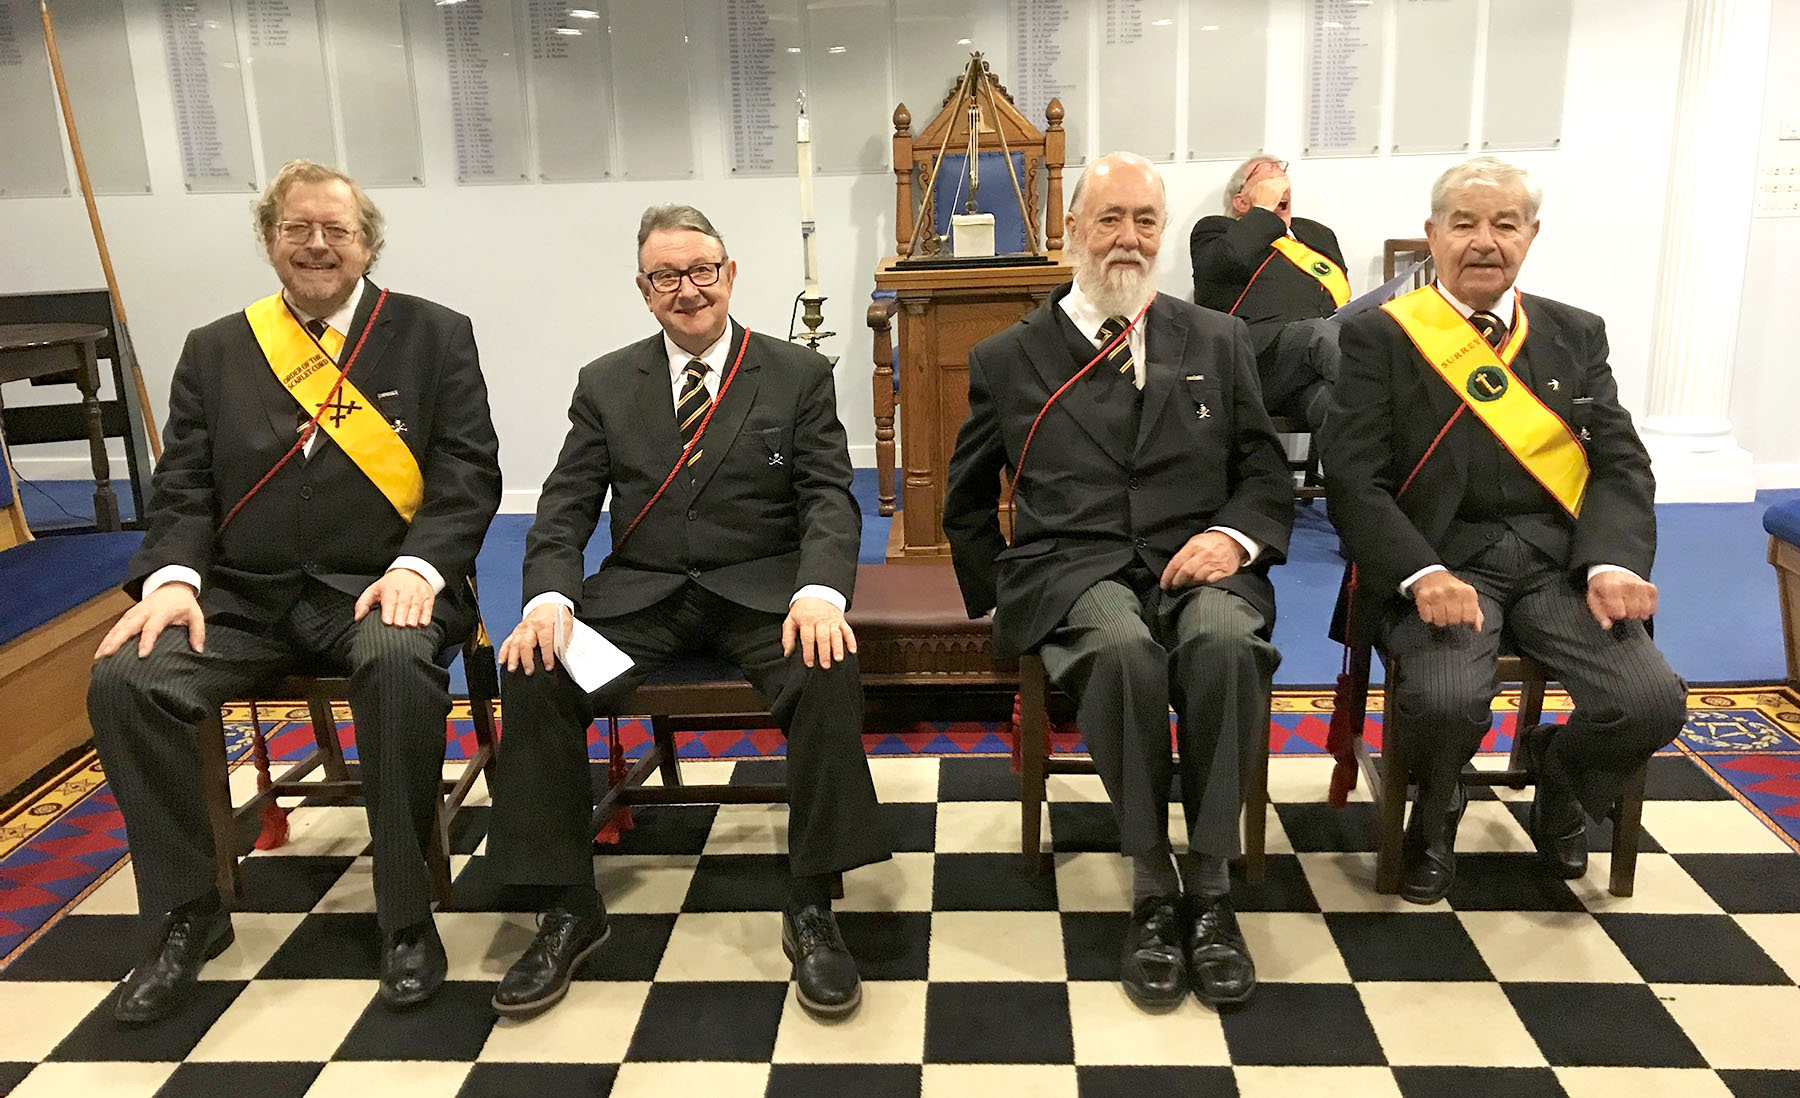 Preparation Ceremony for the Installation of President